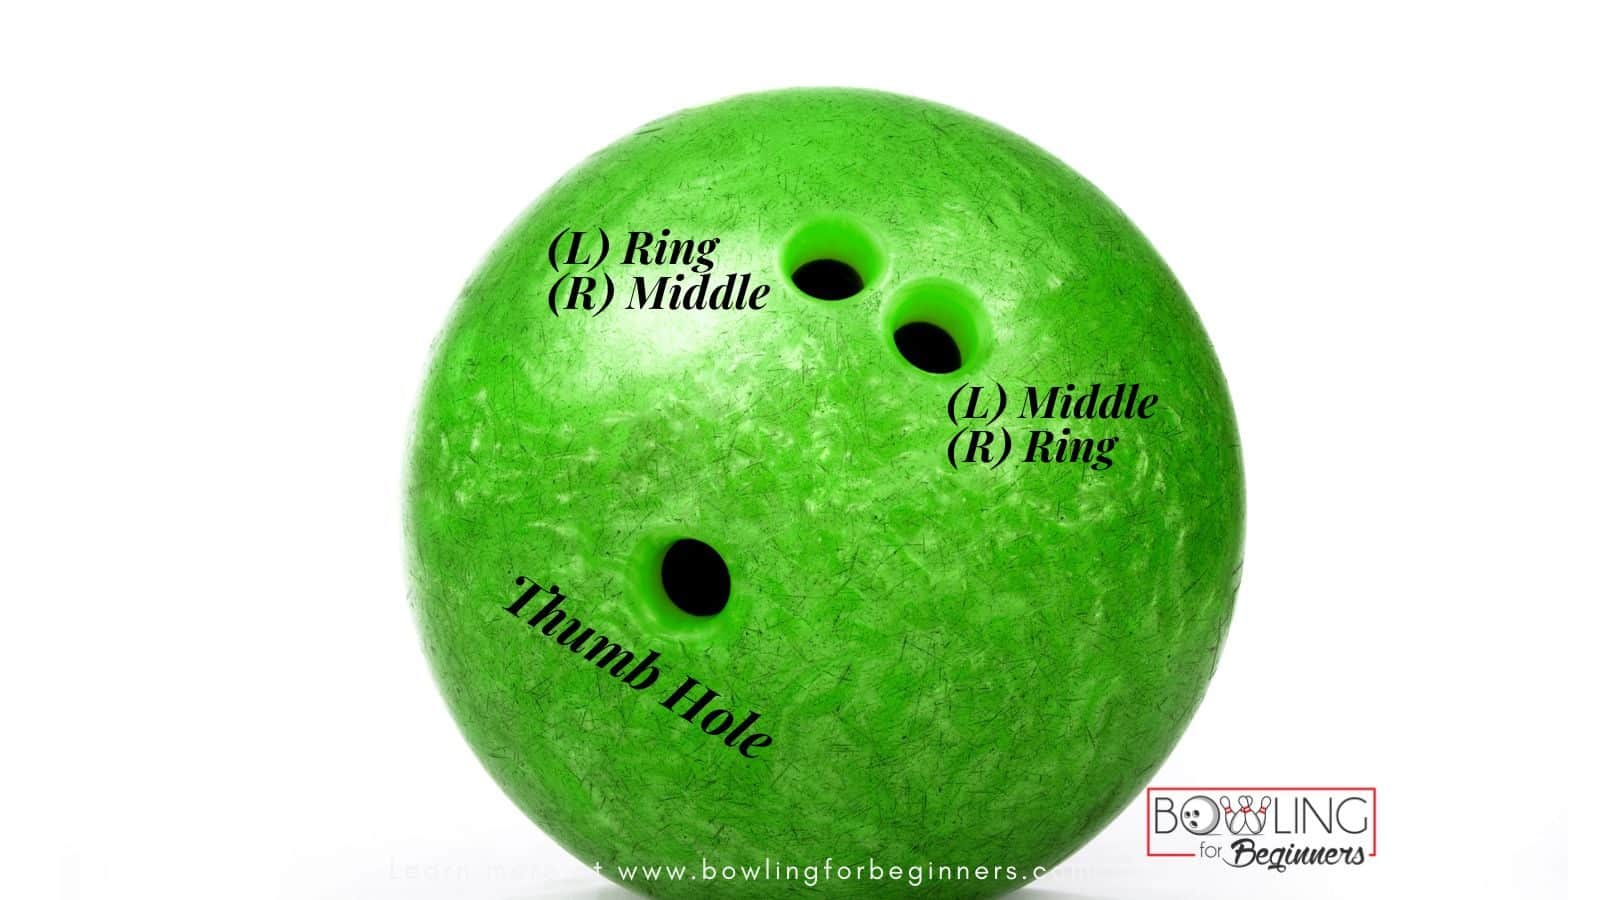 How Do Finger Holes In Bowling Balls Work?